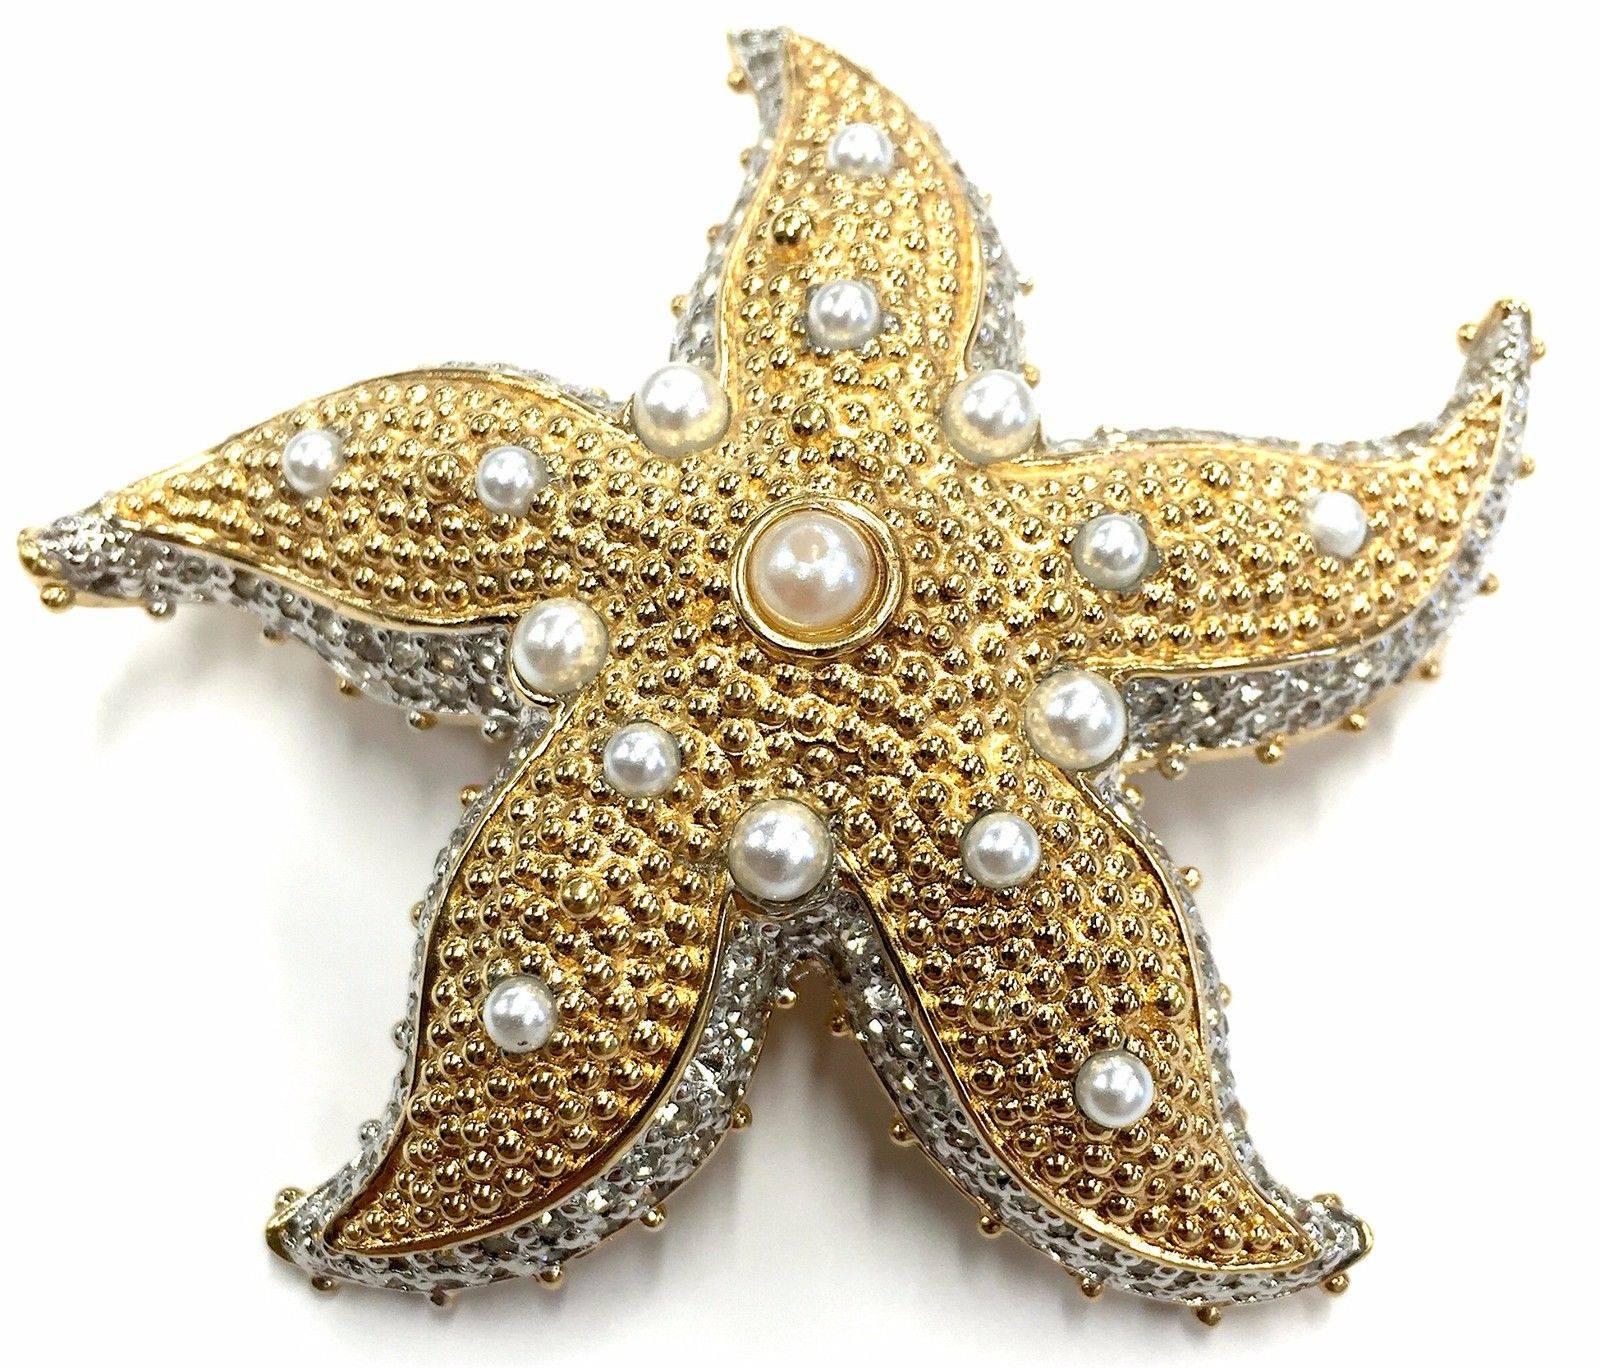 Rare Vintage Signed JUDITH LEIBER Starfish Brooch; 2-Tone Gold Silver Plated; outlined with a double row of Pave clear Swarovski Crystals; Faux round Pearls on textured Gold body; approx. size: 2 .75